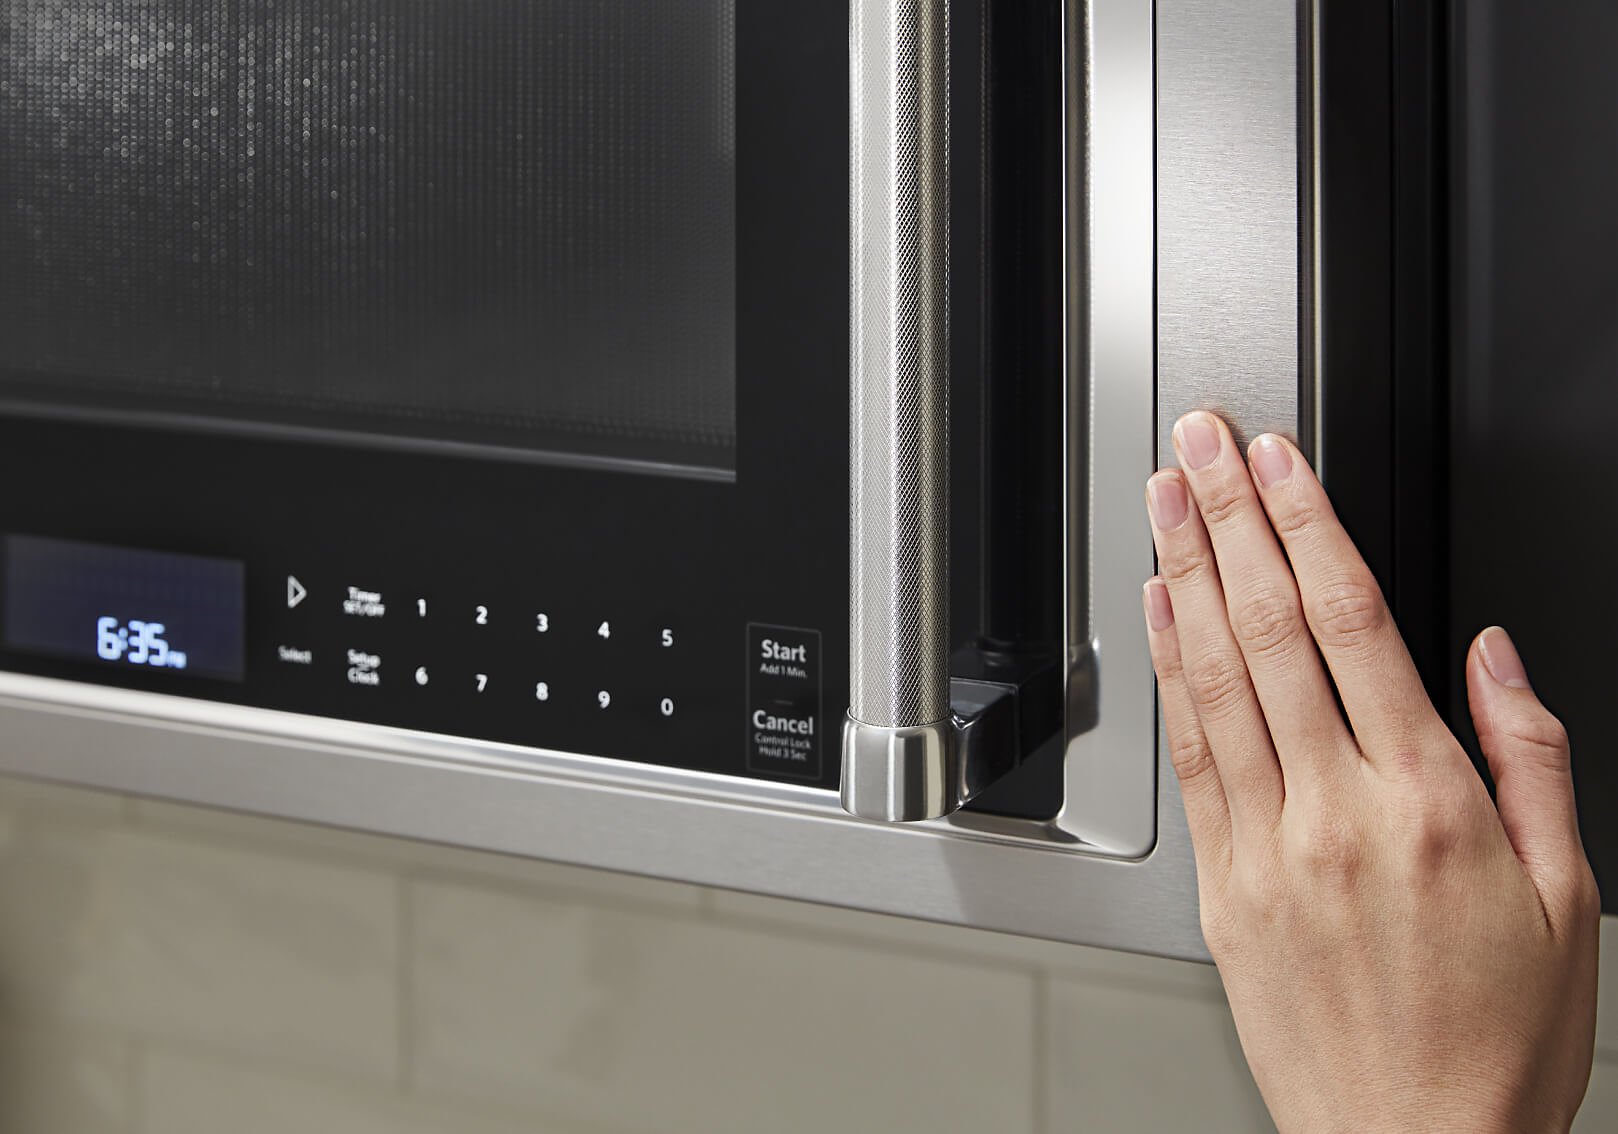 How to Clean Microwave Oven in Minutes, Microwave Cleaning Tips